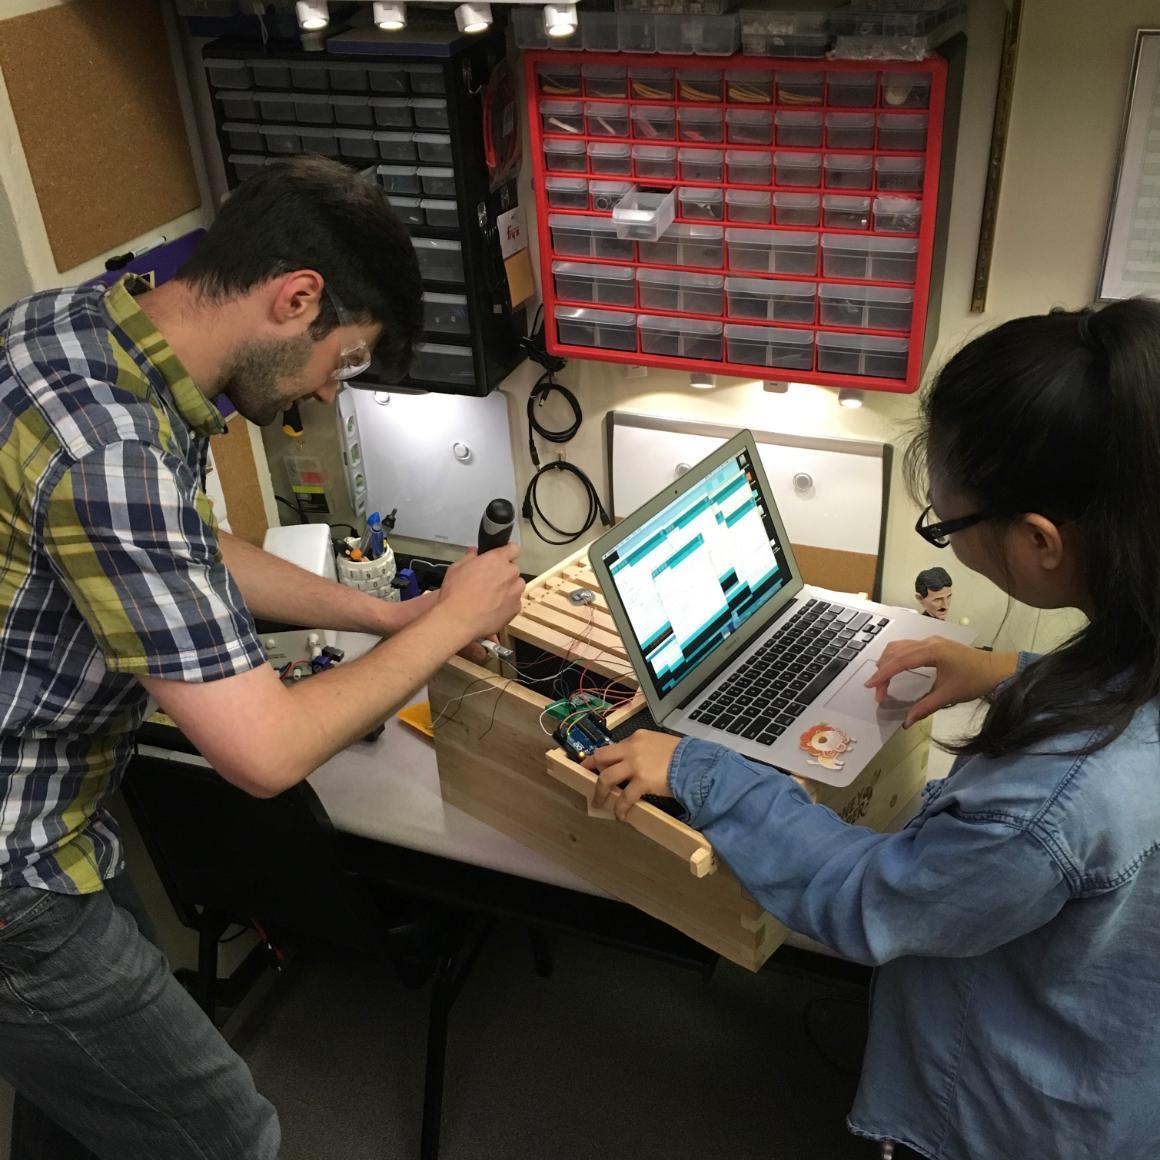 Prof. Navid Shaghaghi and Liying Liang working on assembling sensors in a hive box image link to story